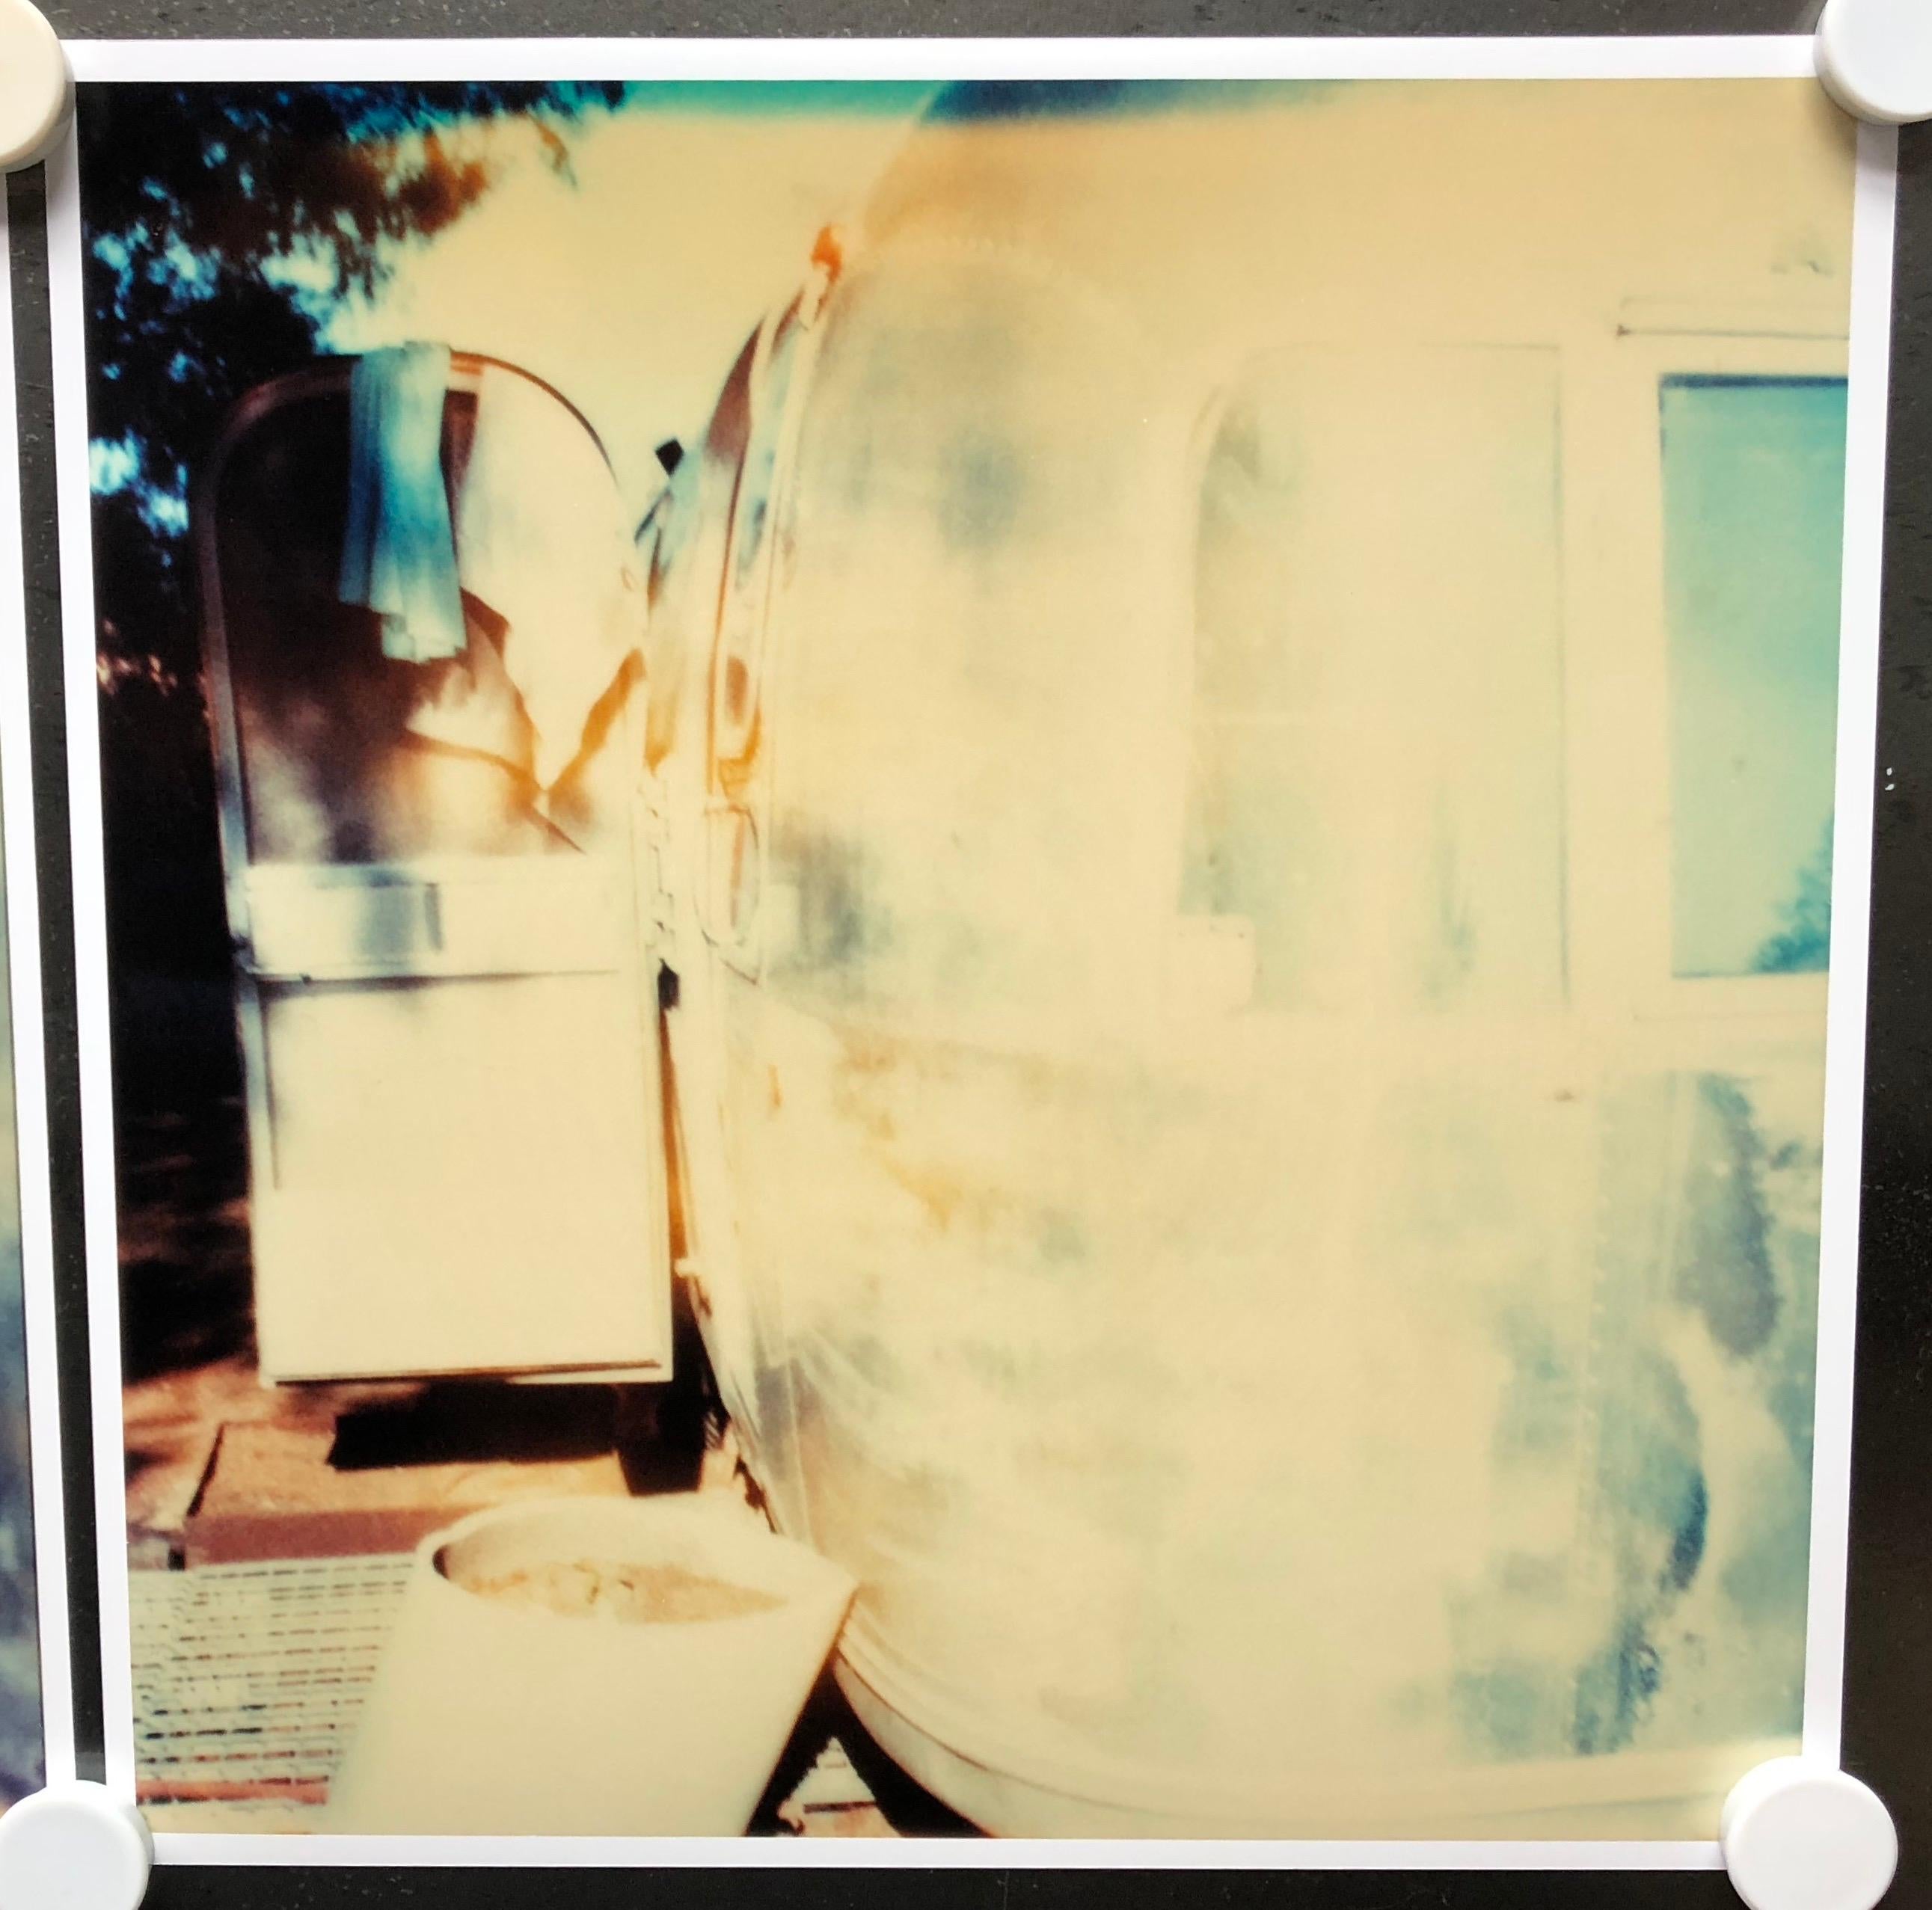 Sidewinder, analog, triptych, Contemporary, Polaroid, Photograph, Abstract, love 5